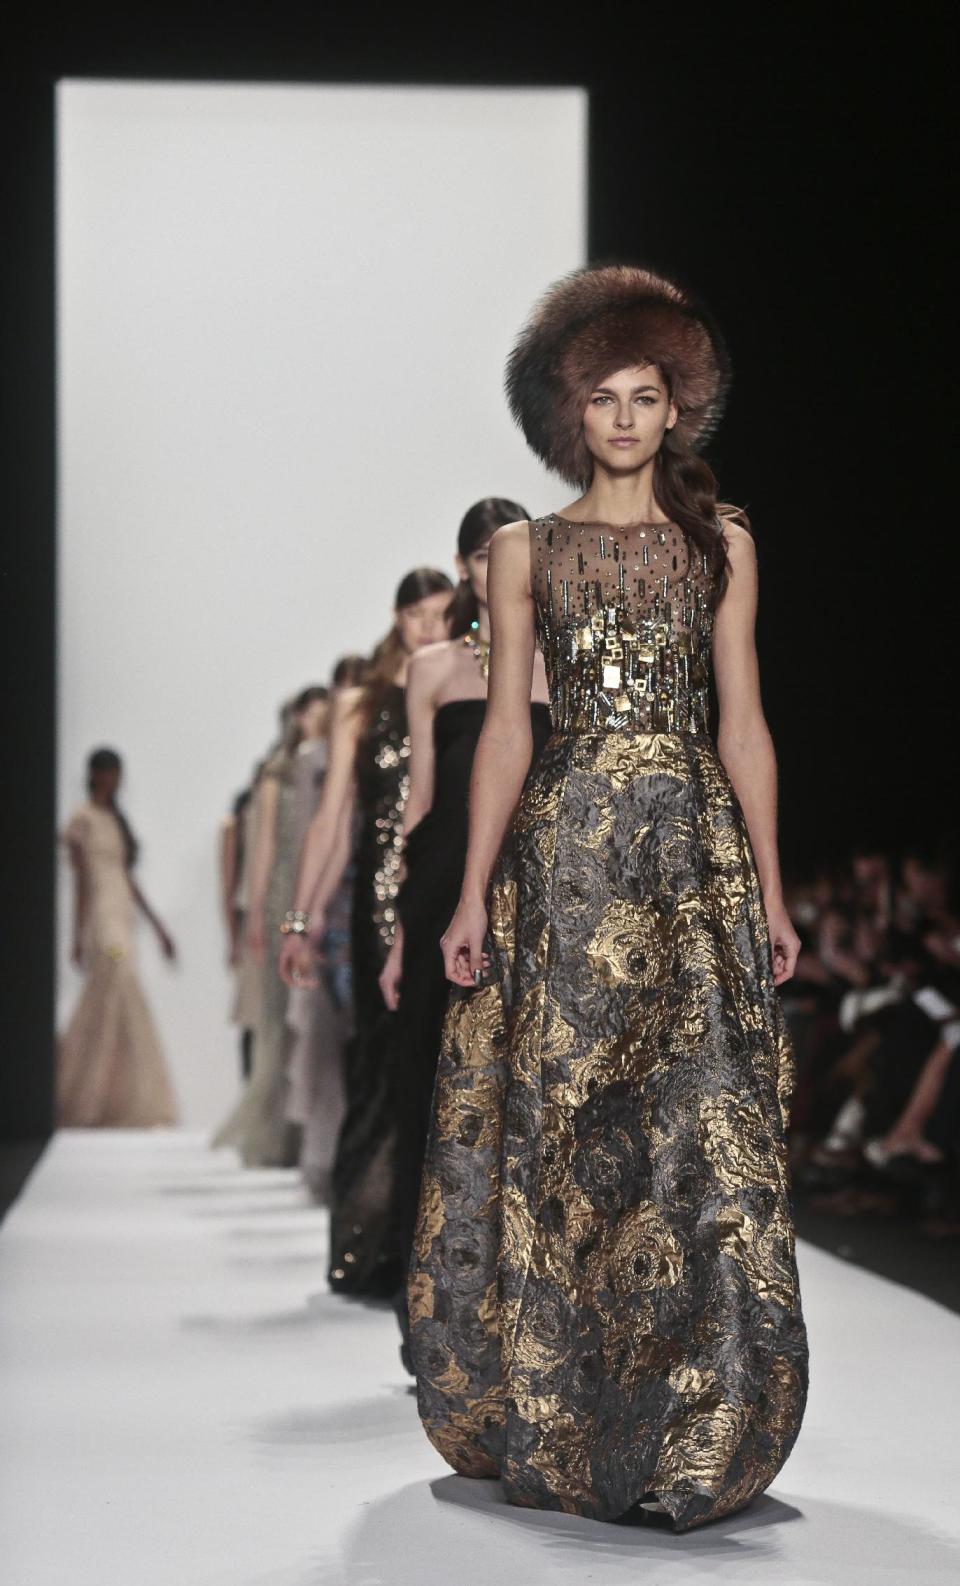 Fashion from the Badgley Mischka Fall 2014 collection is modeled during New York Fashion Week on Tuesday, Feb. 11, 2014. (AP Photo/Bebeto Matthews)